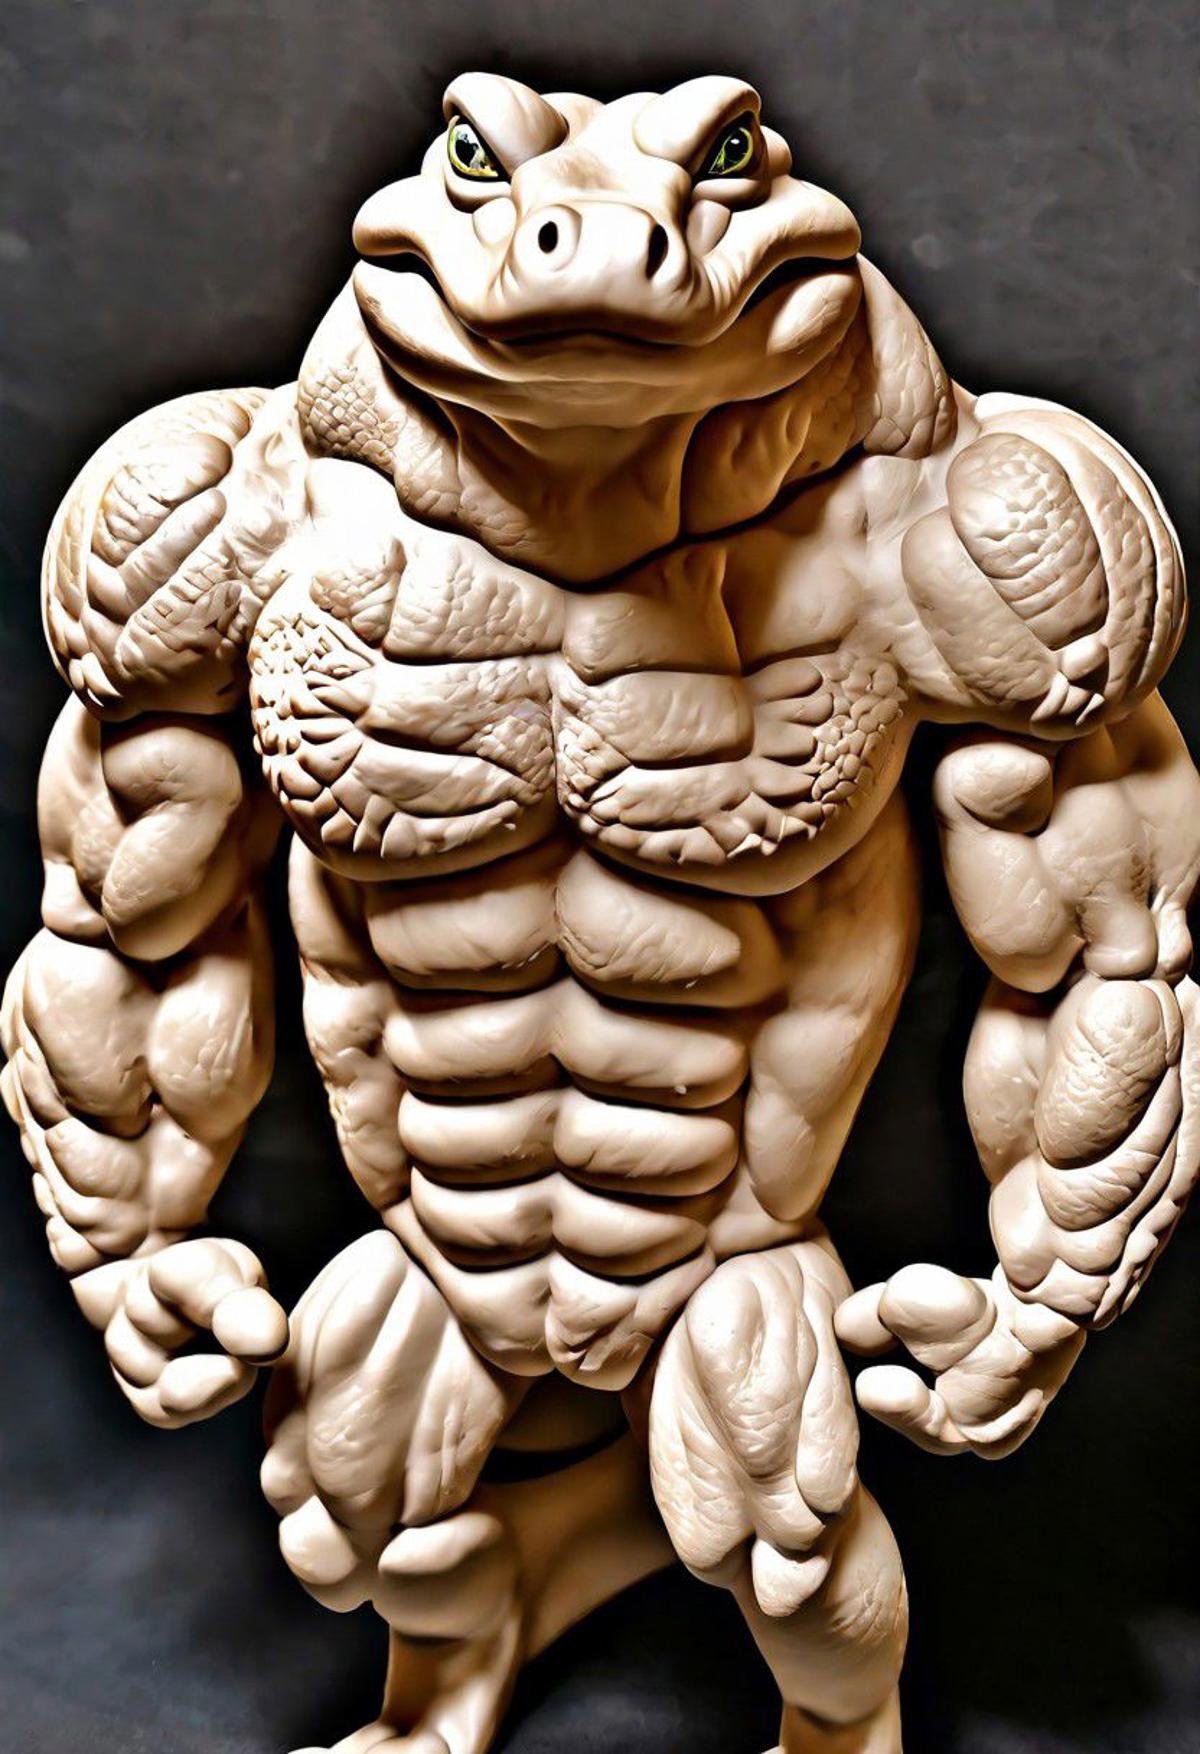 Muscular Bread - SDXL- PAseer image by Clebexxception